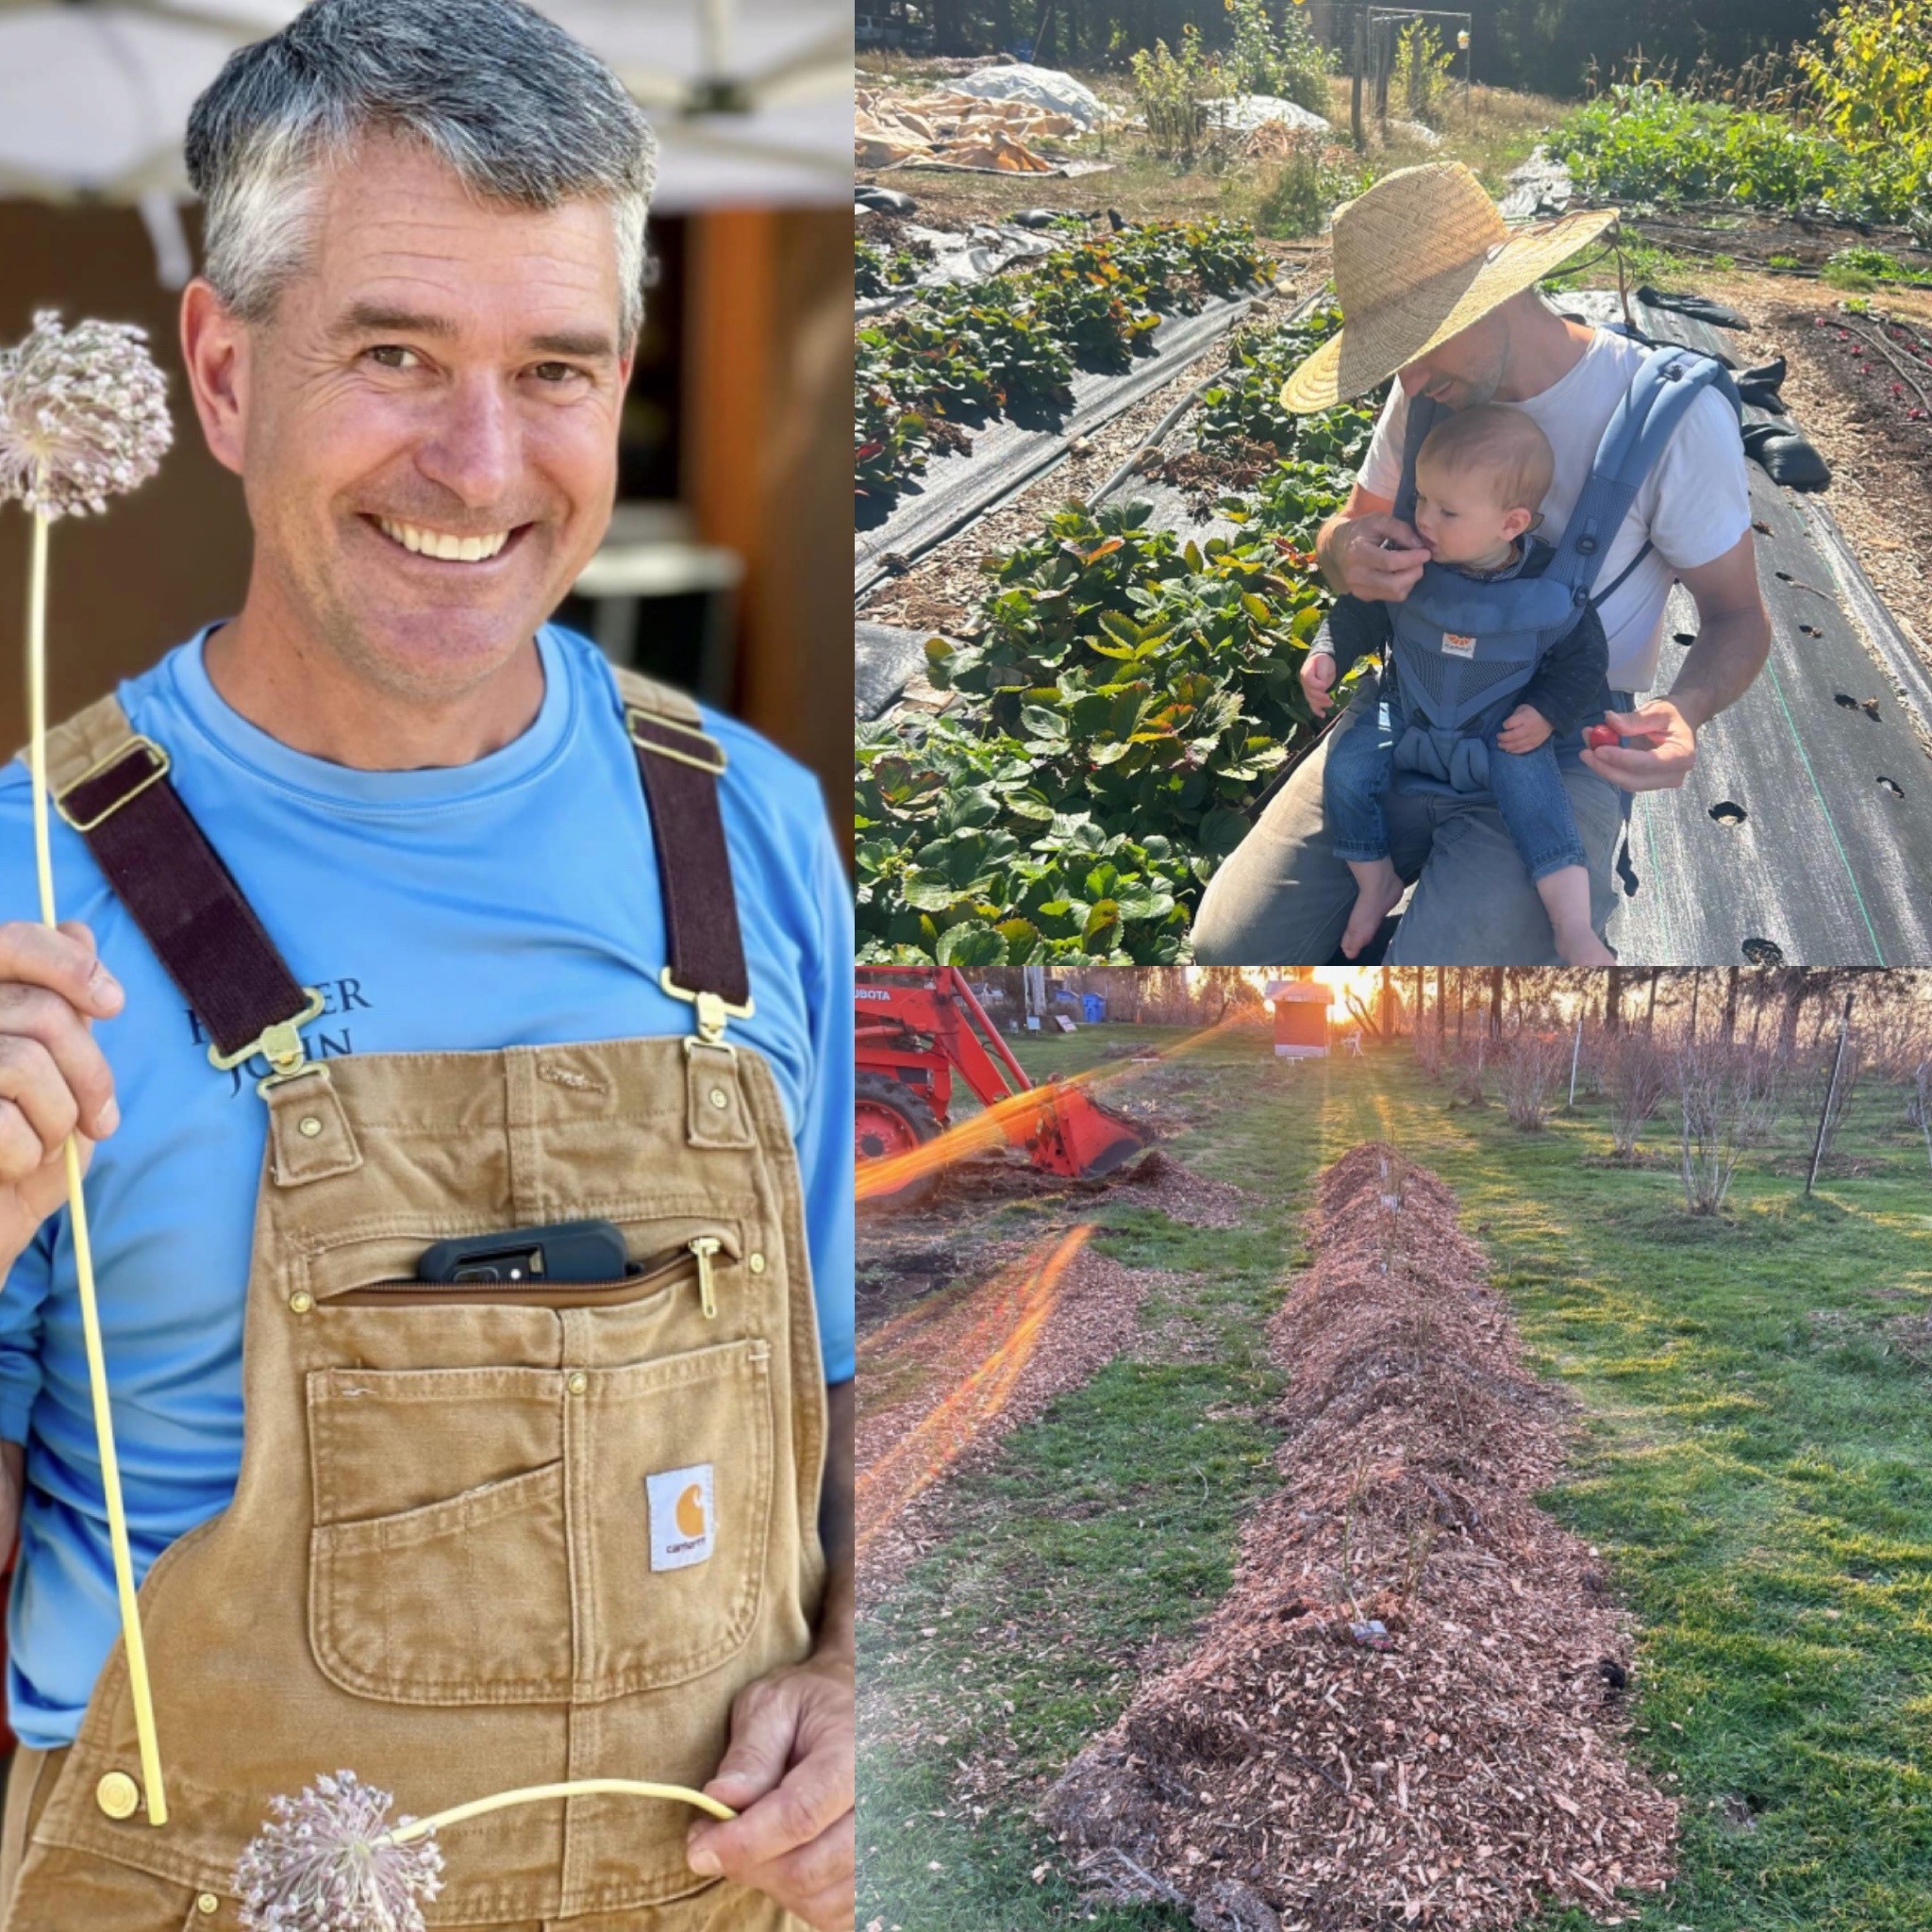 Clockwise from left: Washougal farmer John Spencer raises a flower at the 2023 Camas Farmer's Market; Shady Grove Farm owner Steve Inzalaco works in the field with his son; and farm equipment is seen at the Get To-Gather Farm in Washougal. (Photos courtesy of John Spencer and Camas Farmer's Market)